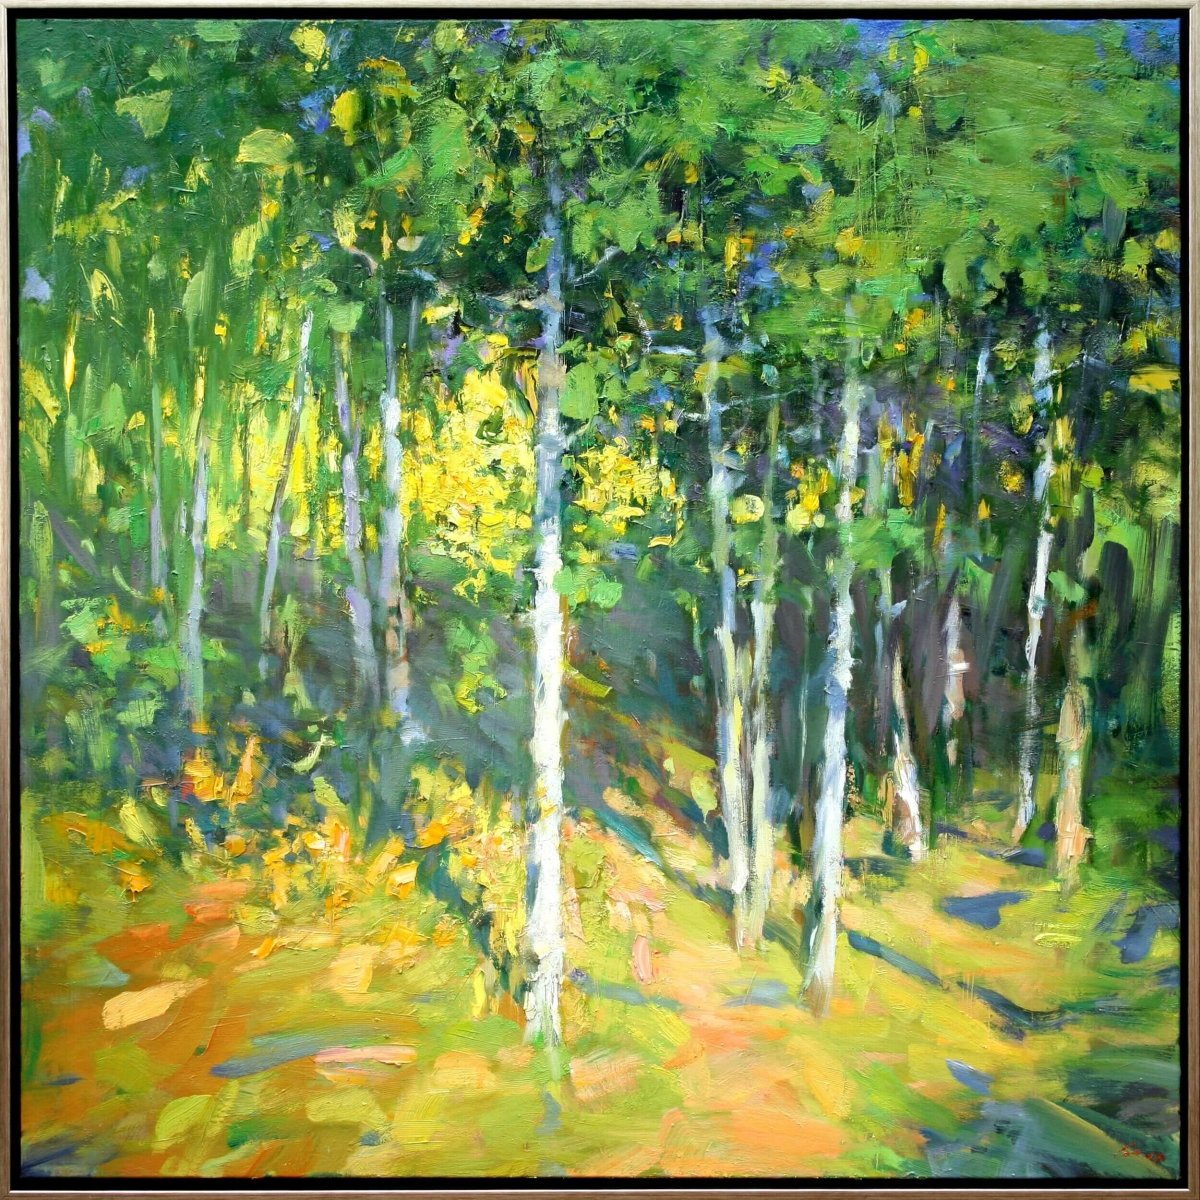 Forest Edge by Ning Lee at LePrince Galleries